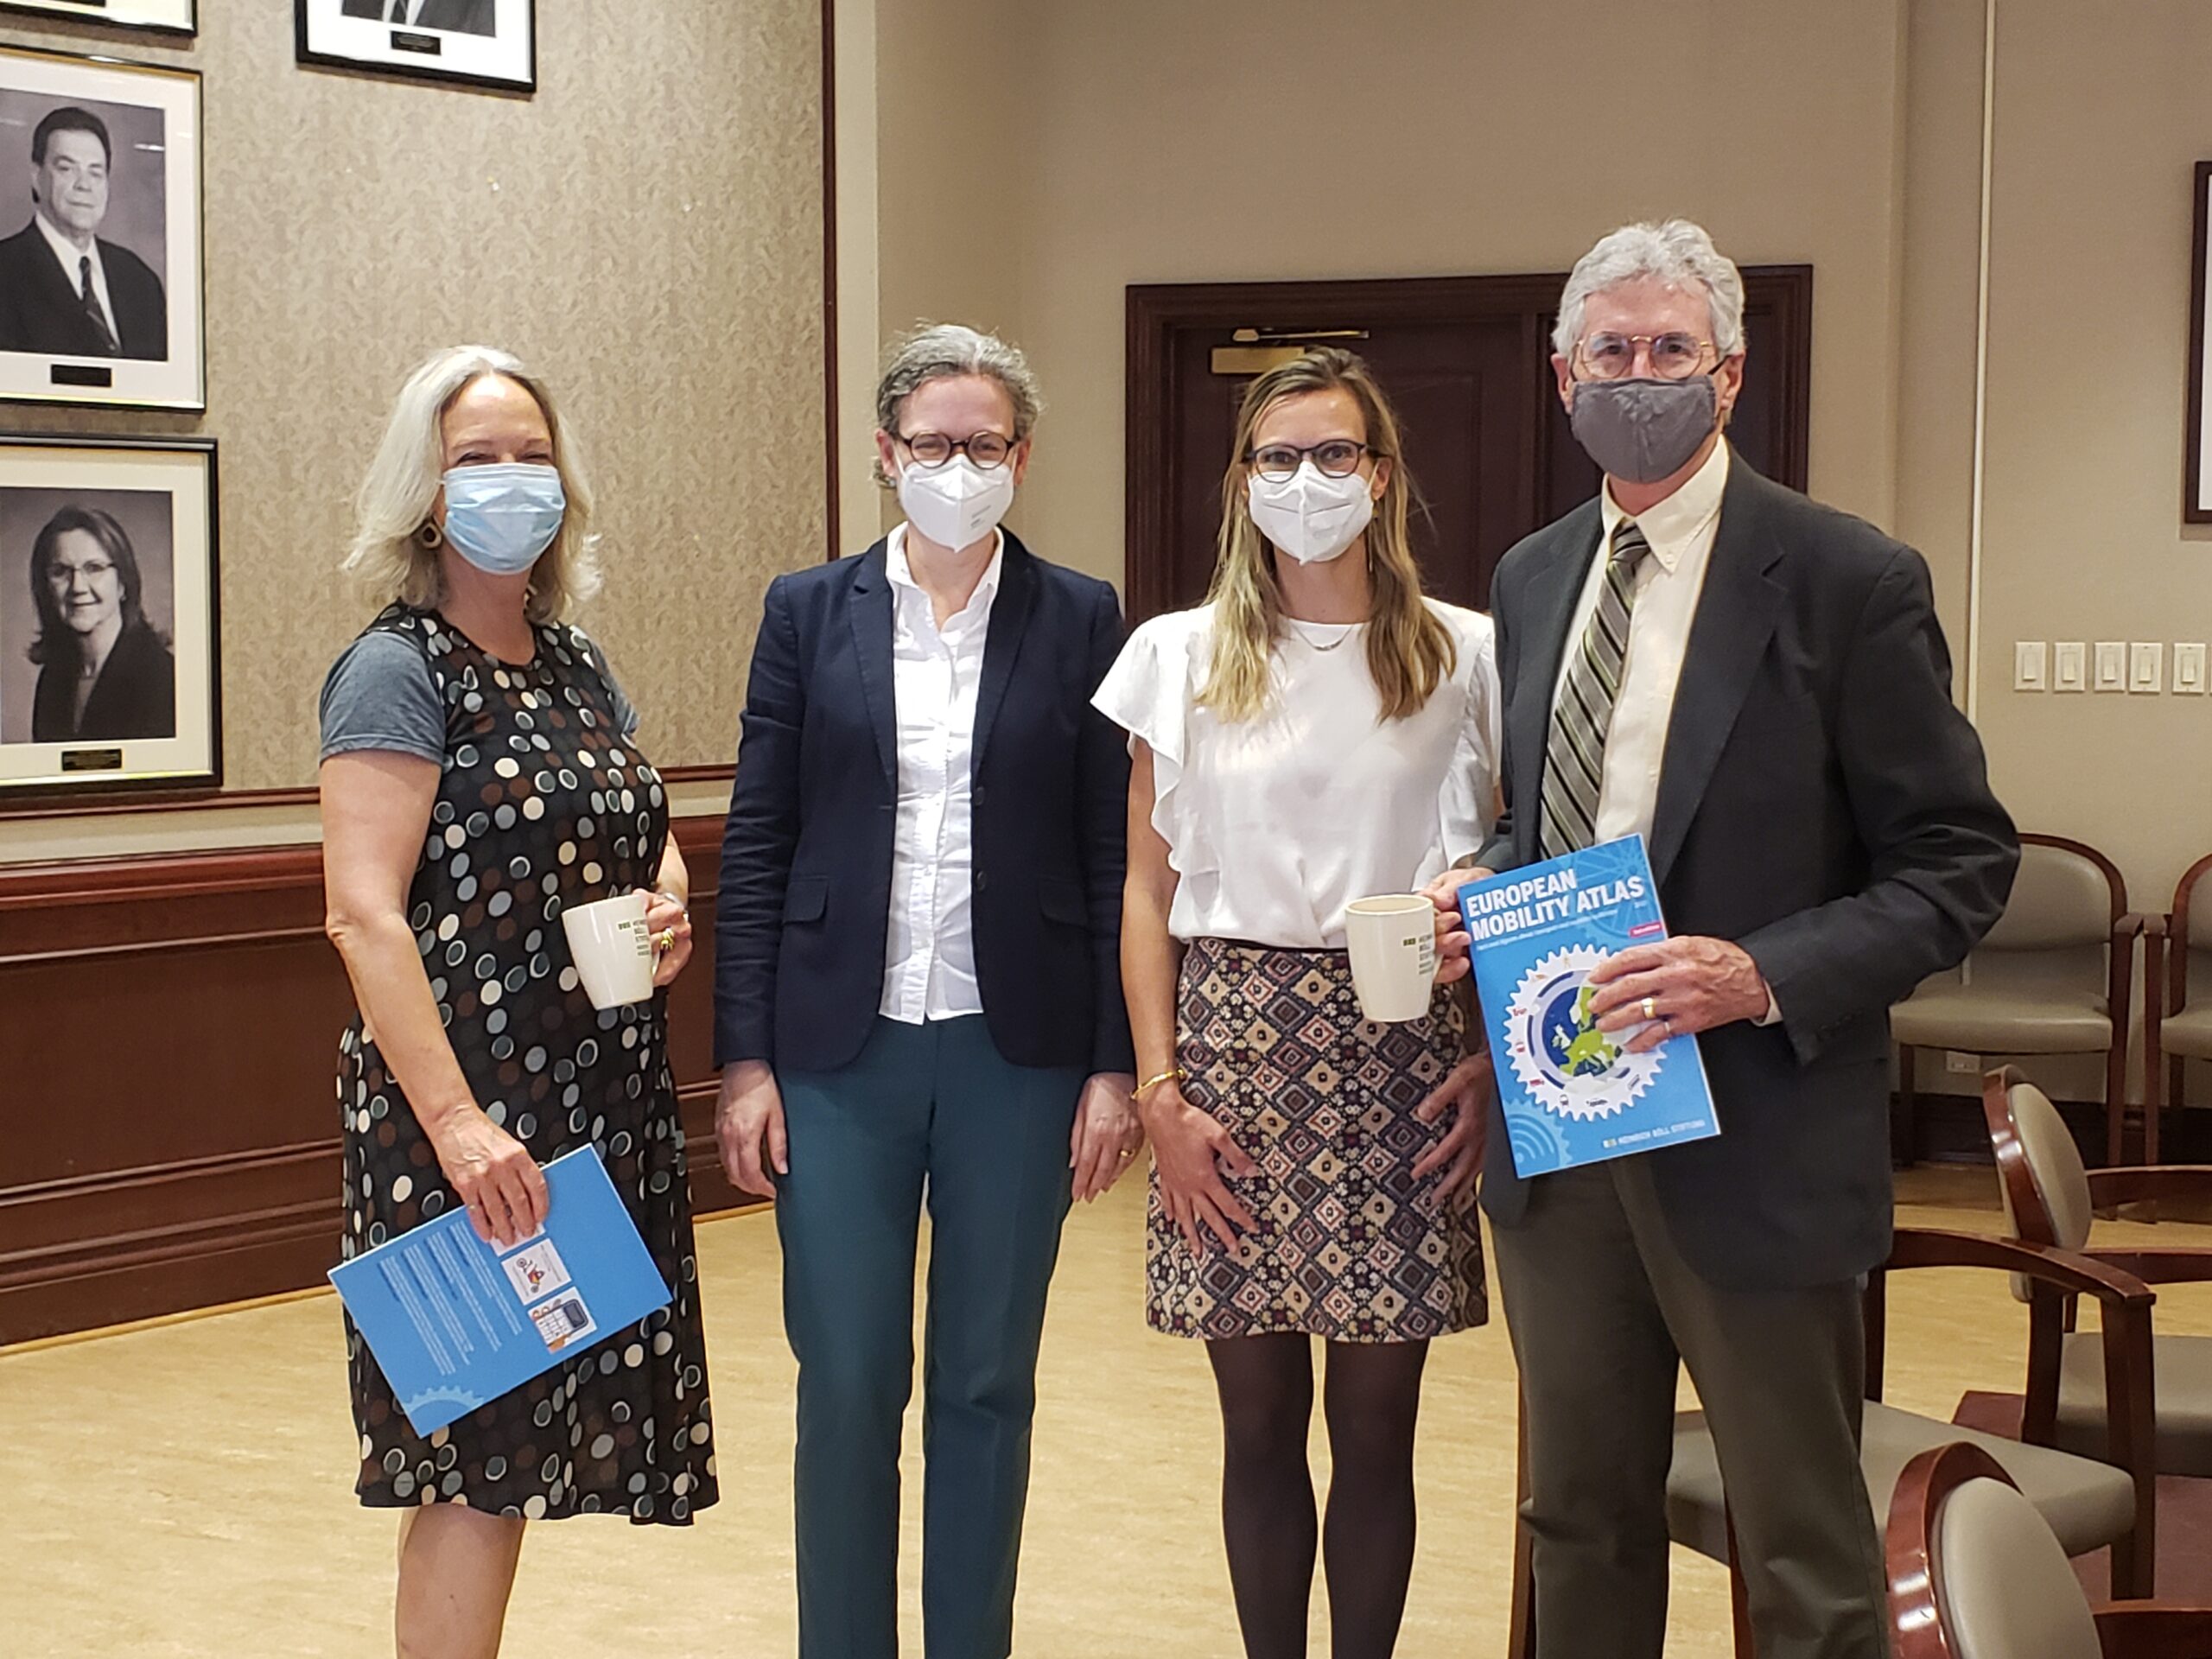 group of four pose for photograph wearing face masks